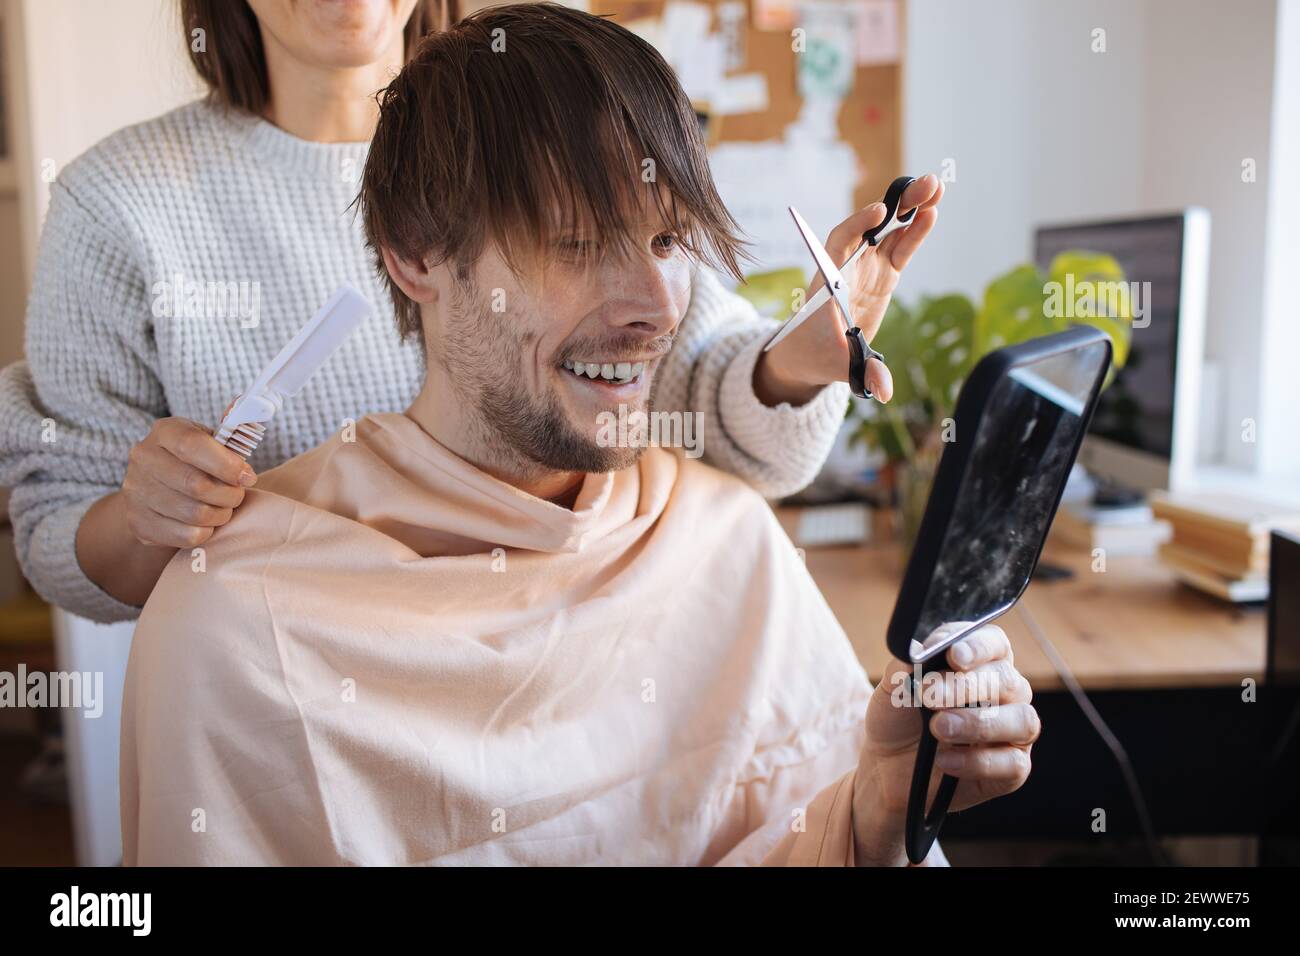 Home haircut. Man cutting hair at home. Life in pandemic during lockdown. How to cut your own Hair when hairdressers are closed. Easiest Self-haircut Stock Photo